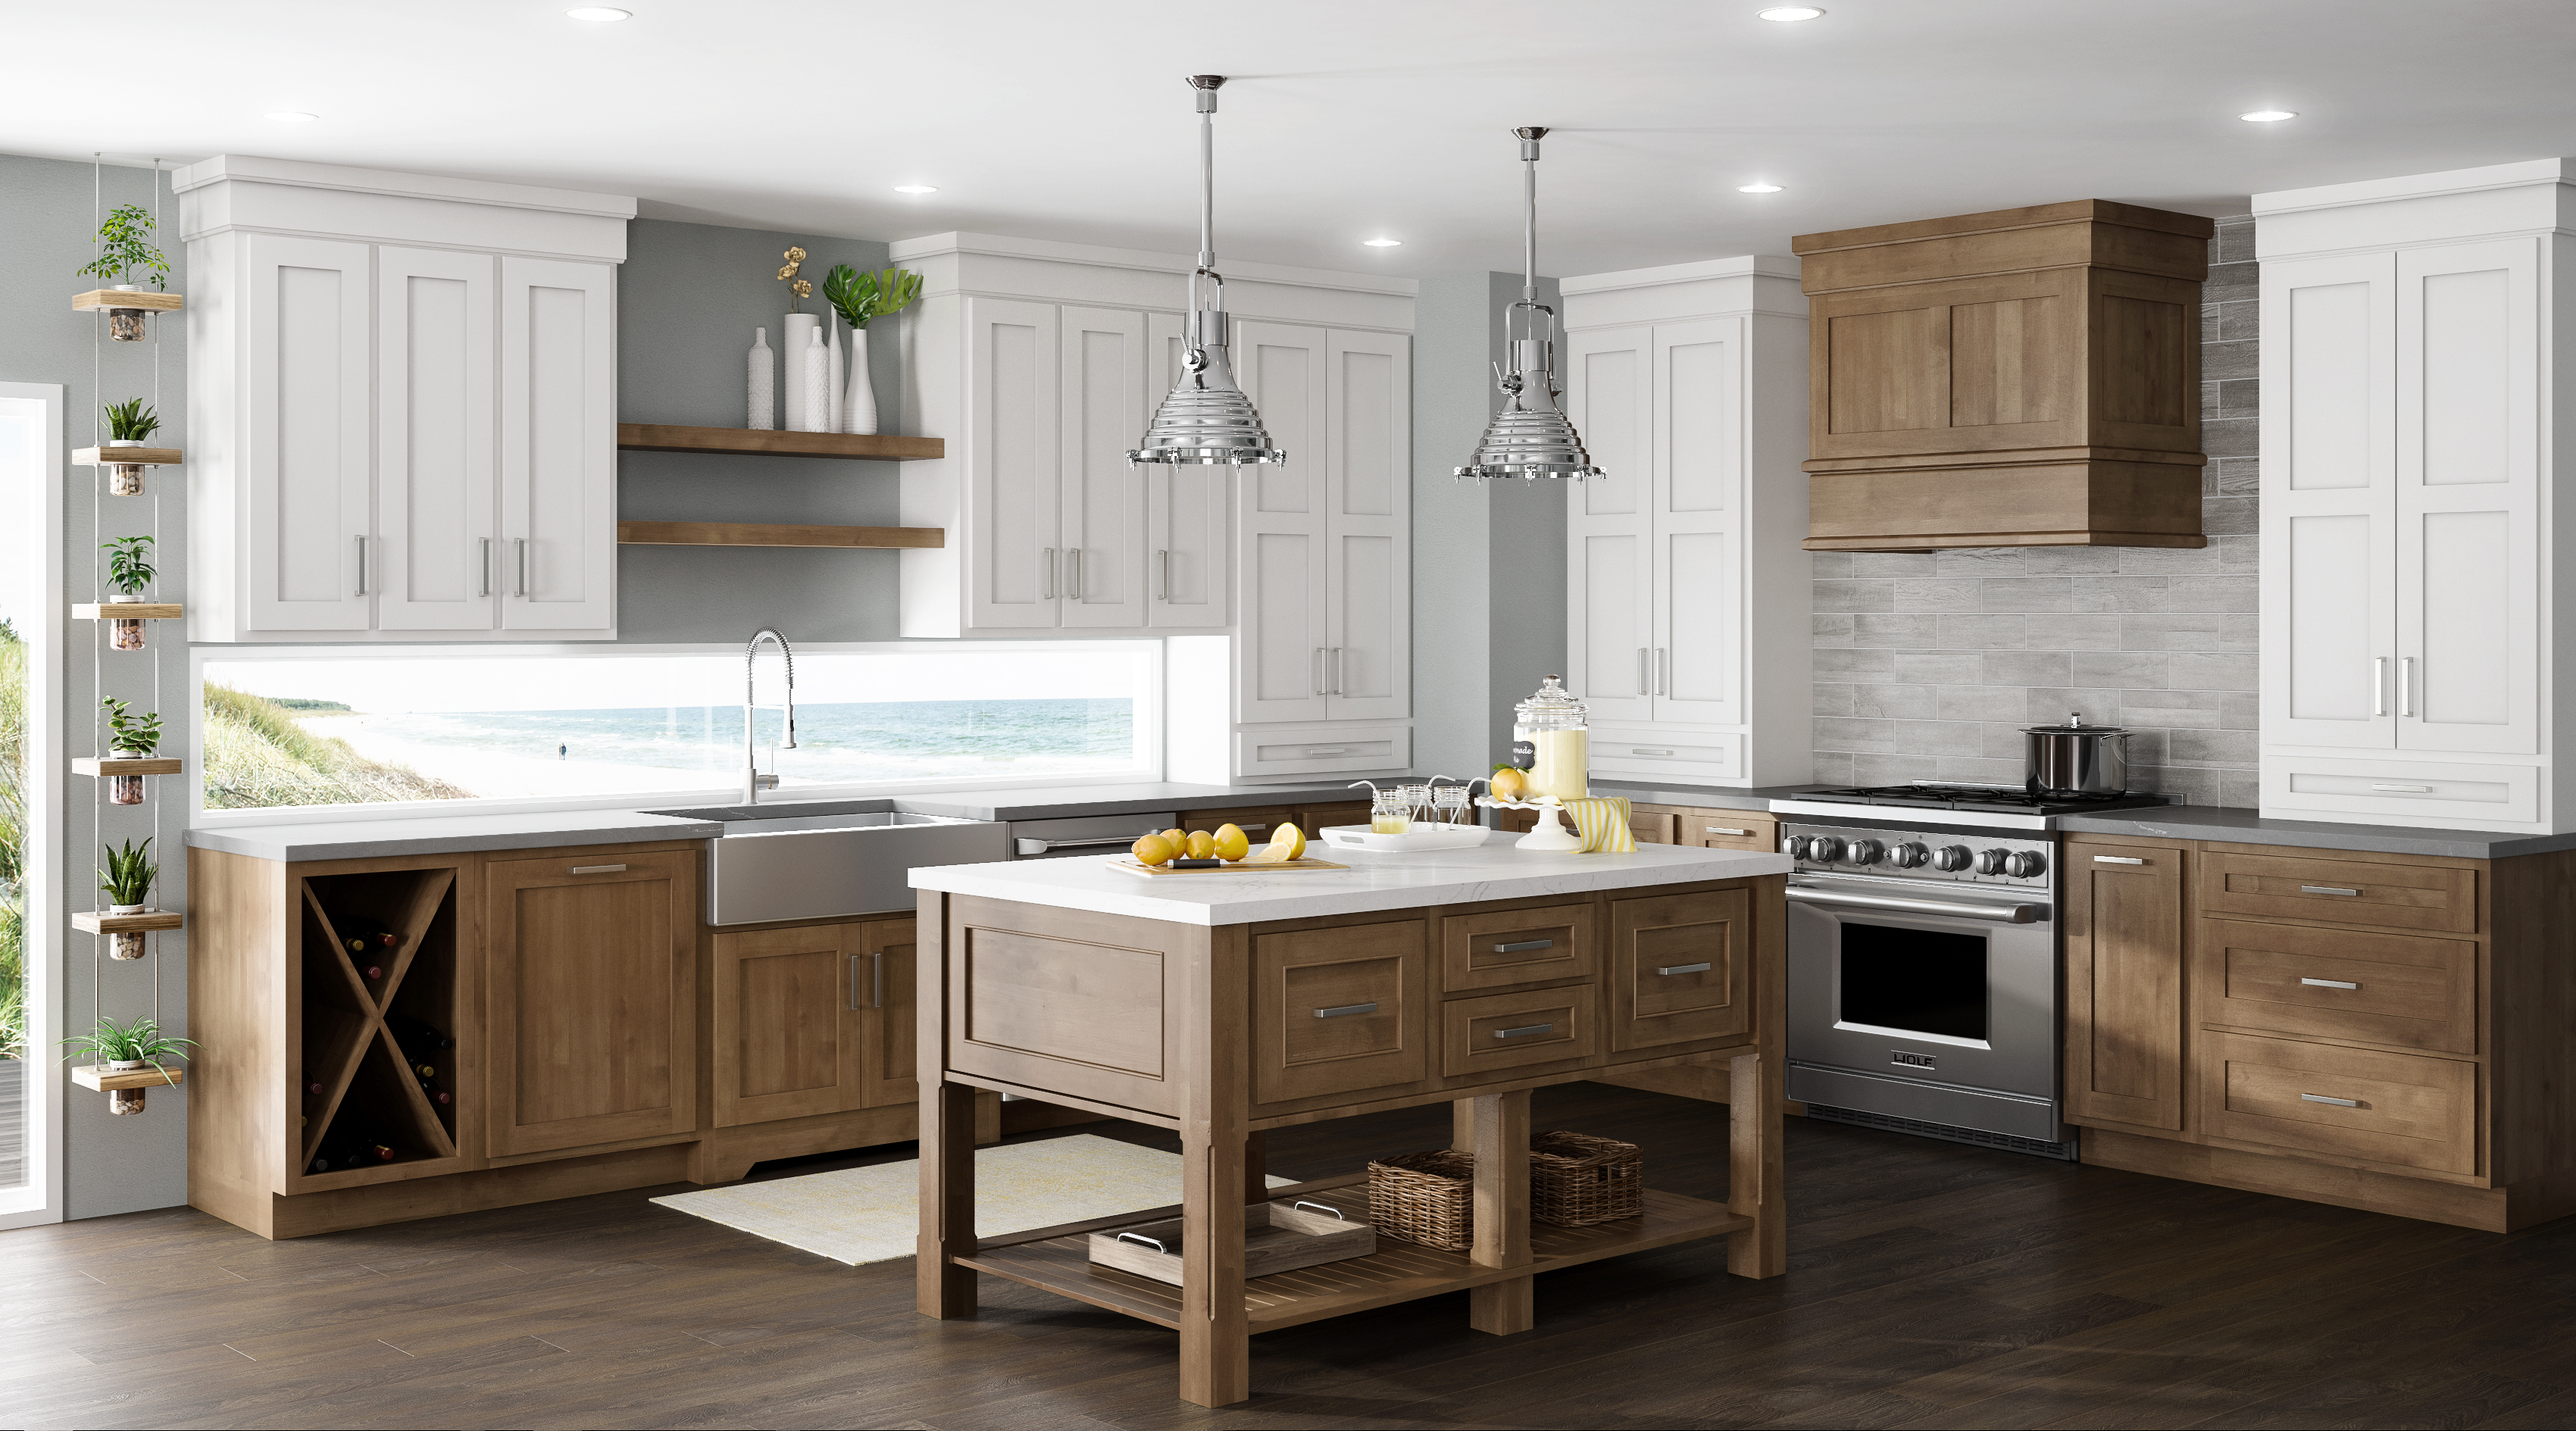 A kitchen layout idea in an L-Shaped kitchen design with a farm table style kitchen island. Standard overlay cabinet doors create add a splash of traditional style in this modern beach home.